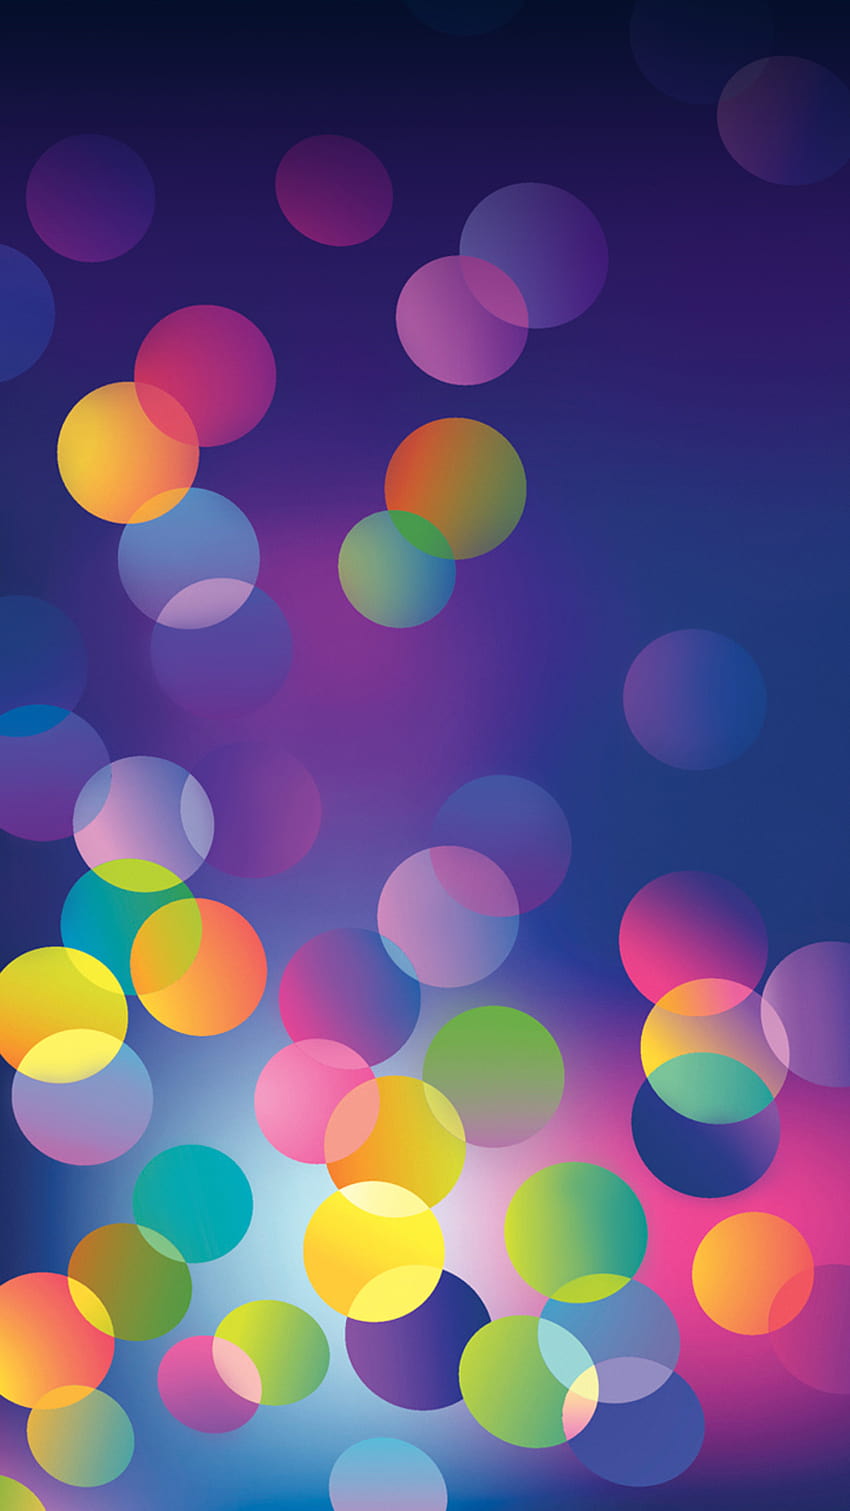 Colorful iPhone Backgrounds, mixed colorful HD phone wallpaper